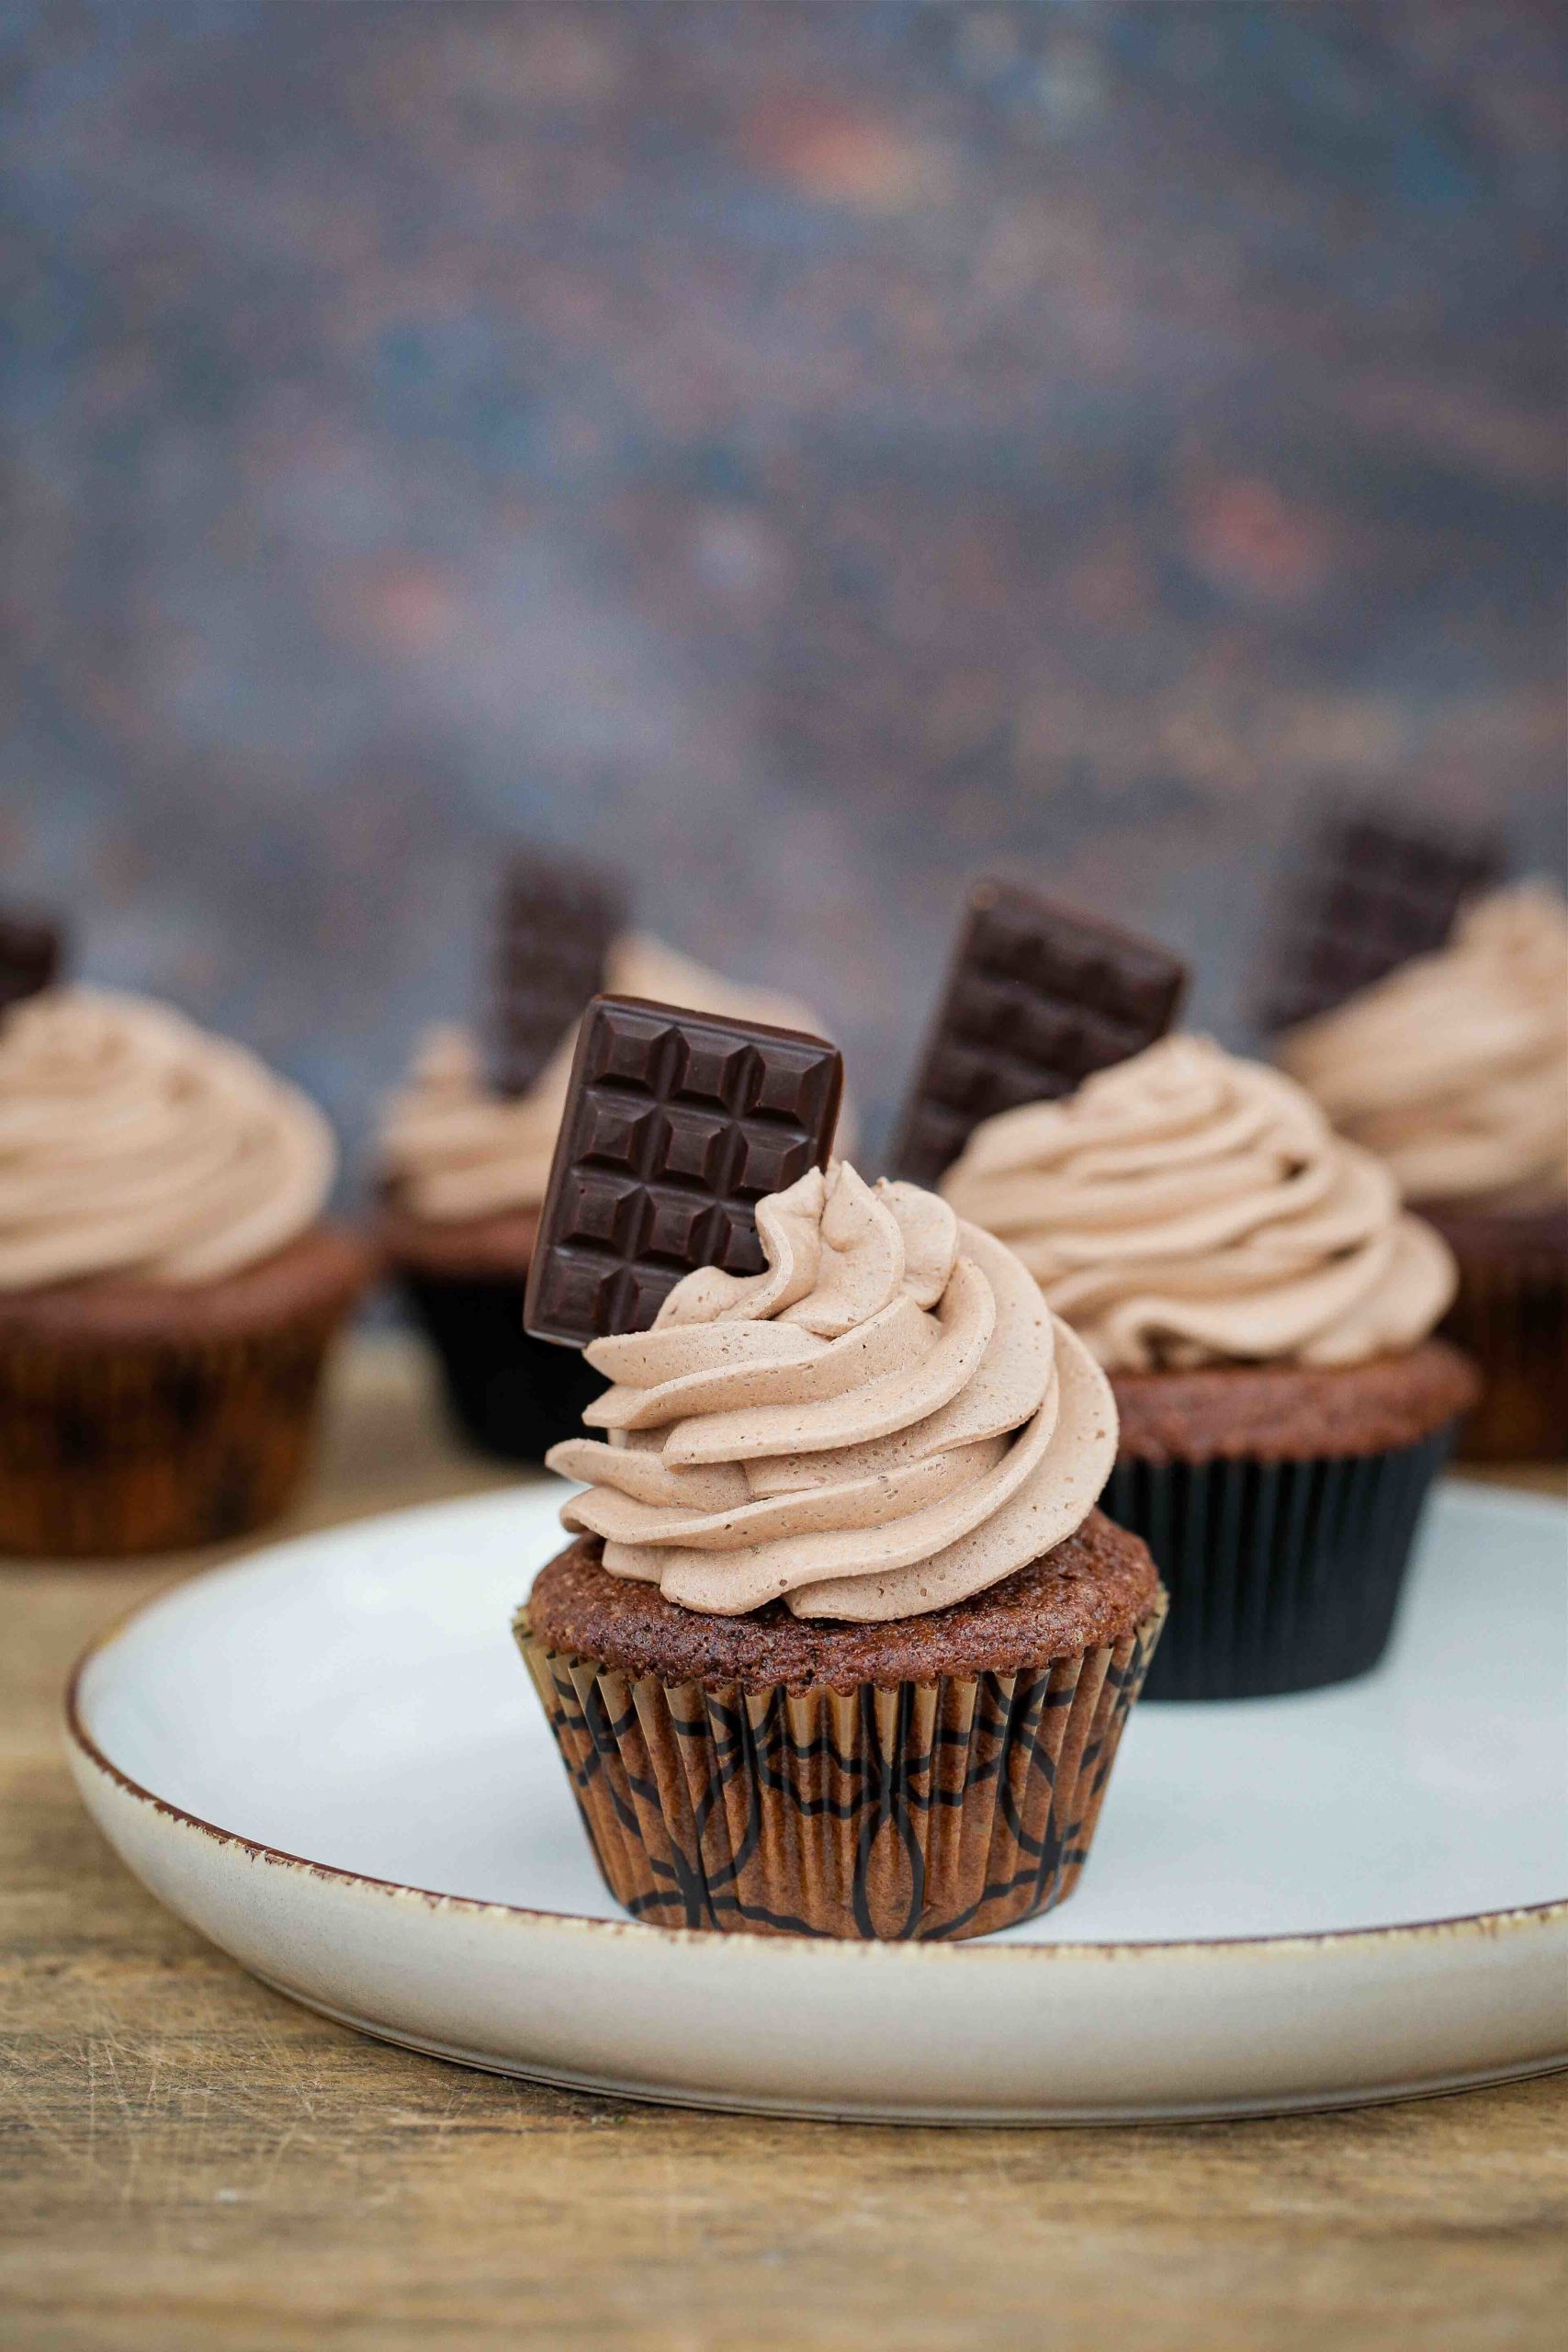 Warming chai spices are blended into these vegan chocolate cupcakes. Top with a fluffy chocolate buttercream for a delightful afternoon treat! Recipe on thecookandhim.com #vegancupcakes #buttercream #chaispice #chailatte #chocolatecupcakes